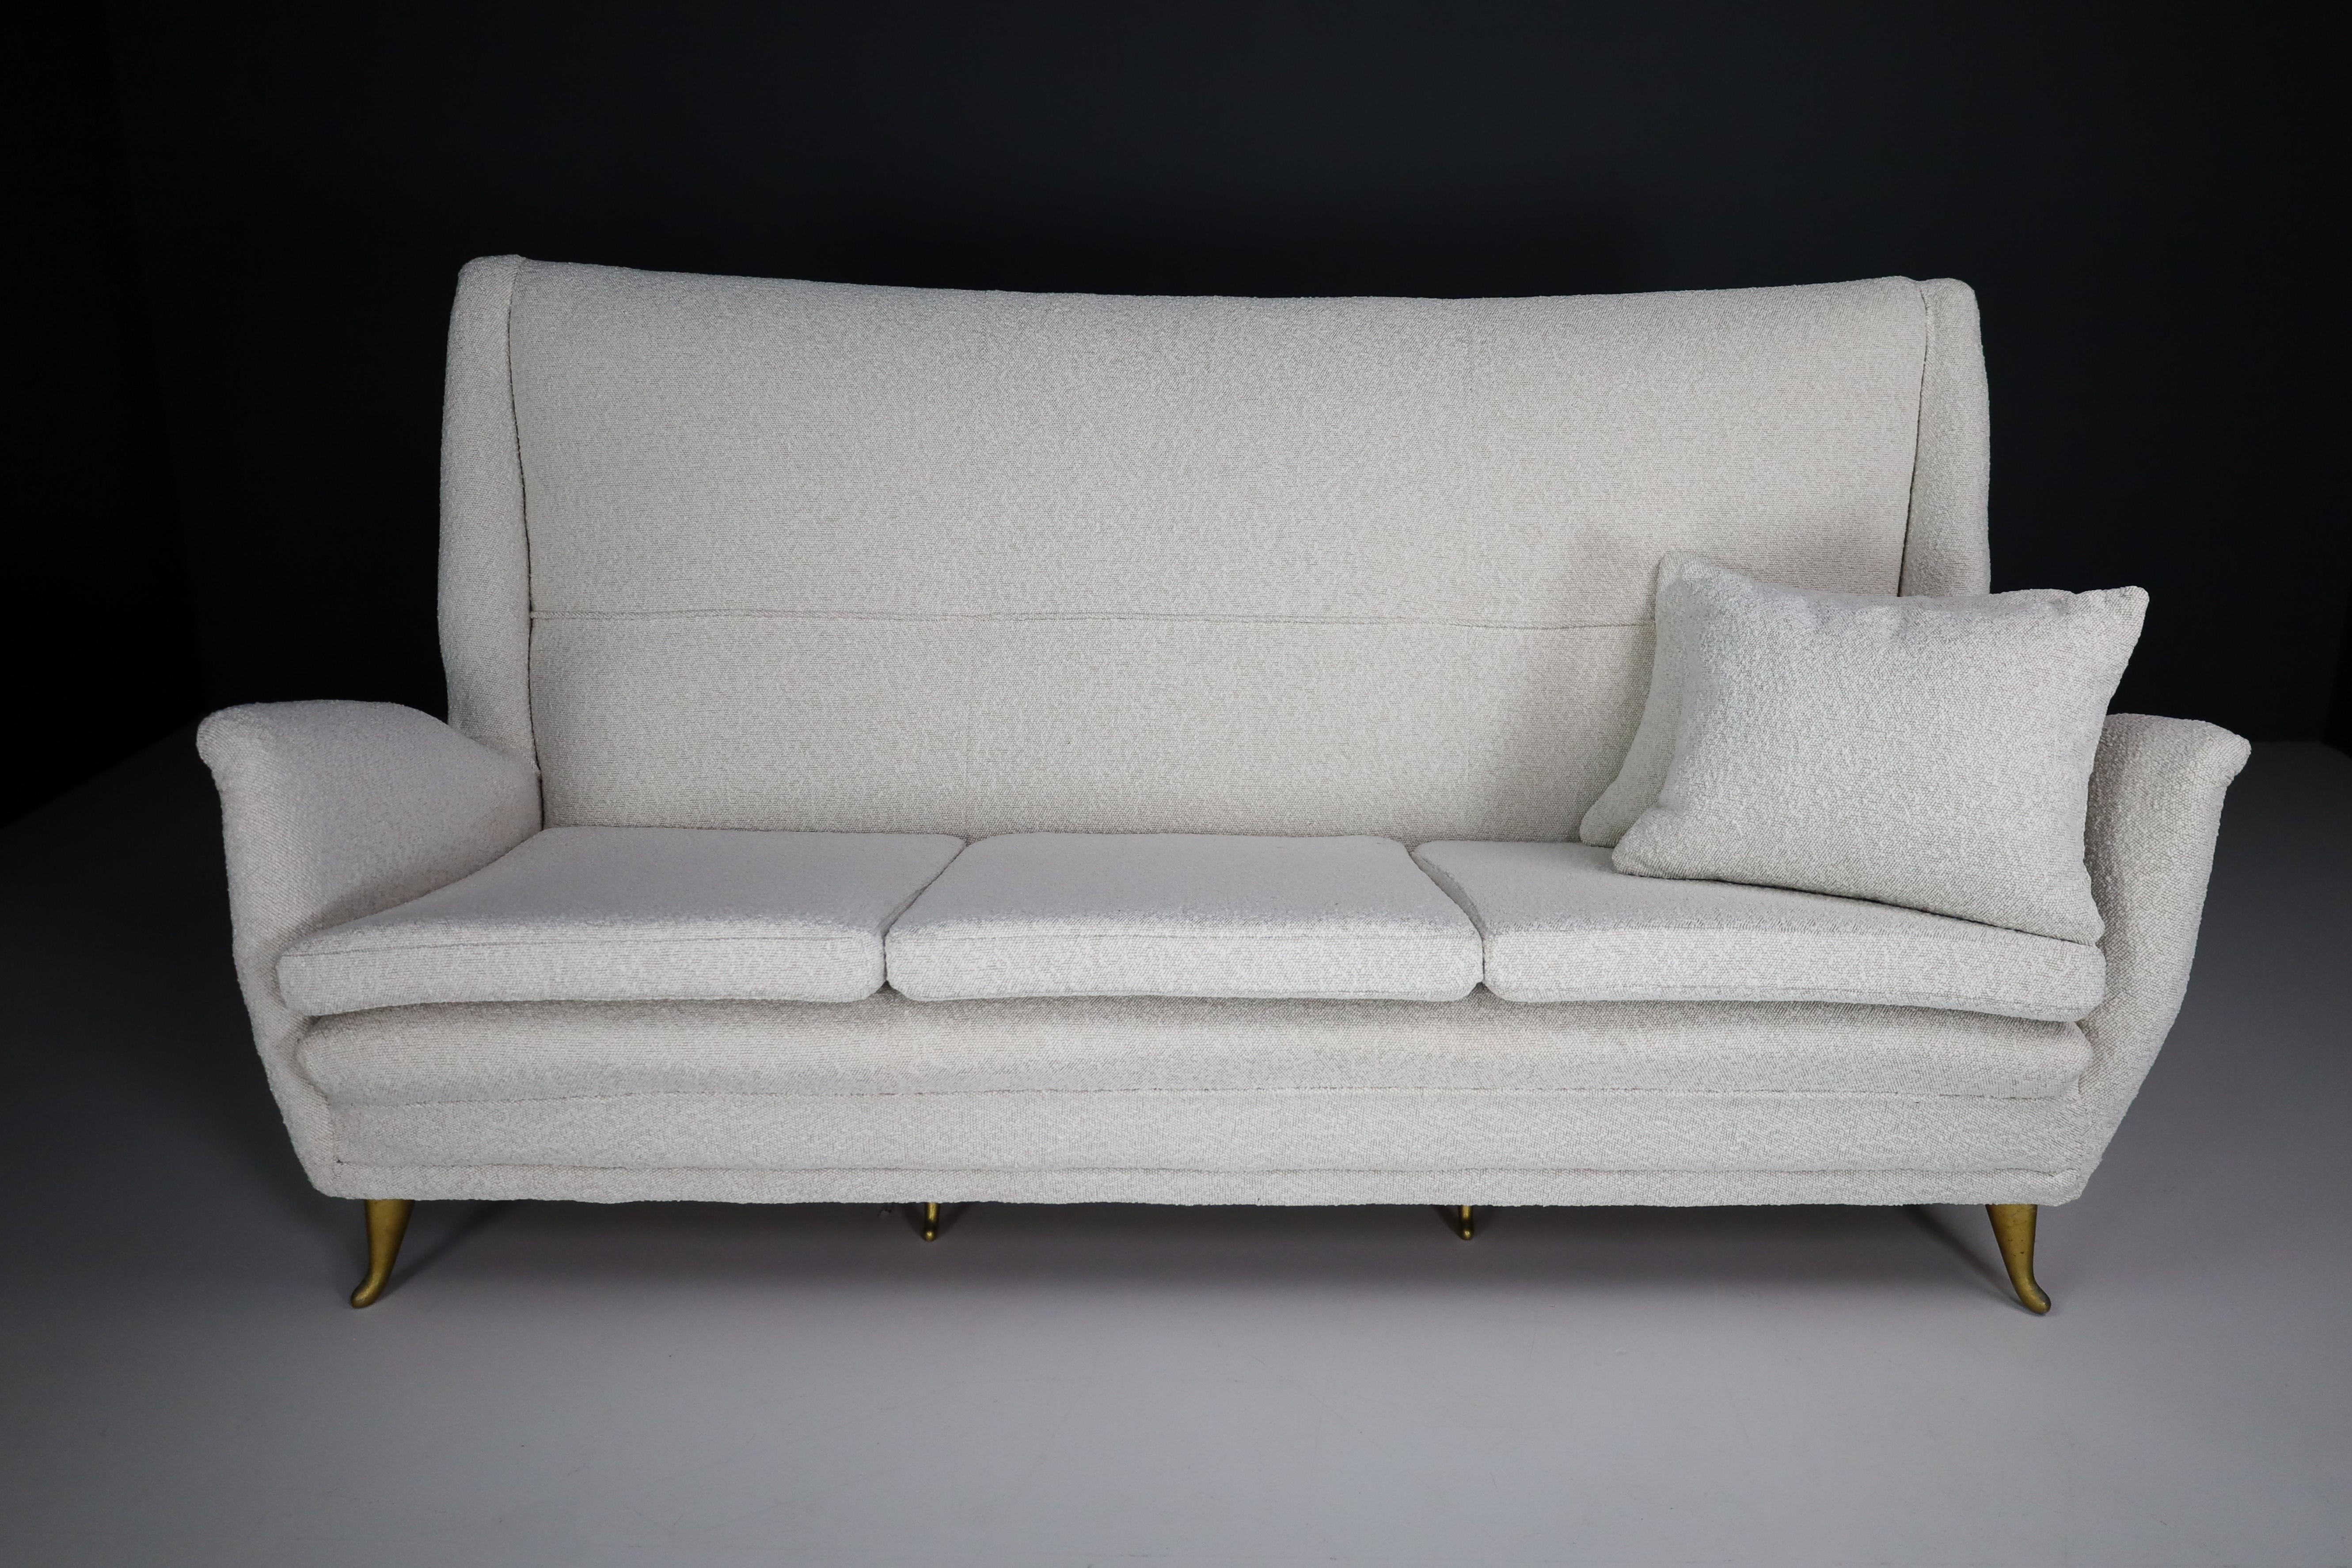 High Back Sofa By Gio Ponti For ISA Bergamo in Bouclé Fabric Upholstery 1950s In Good Condition For Sale In Almelo, NL